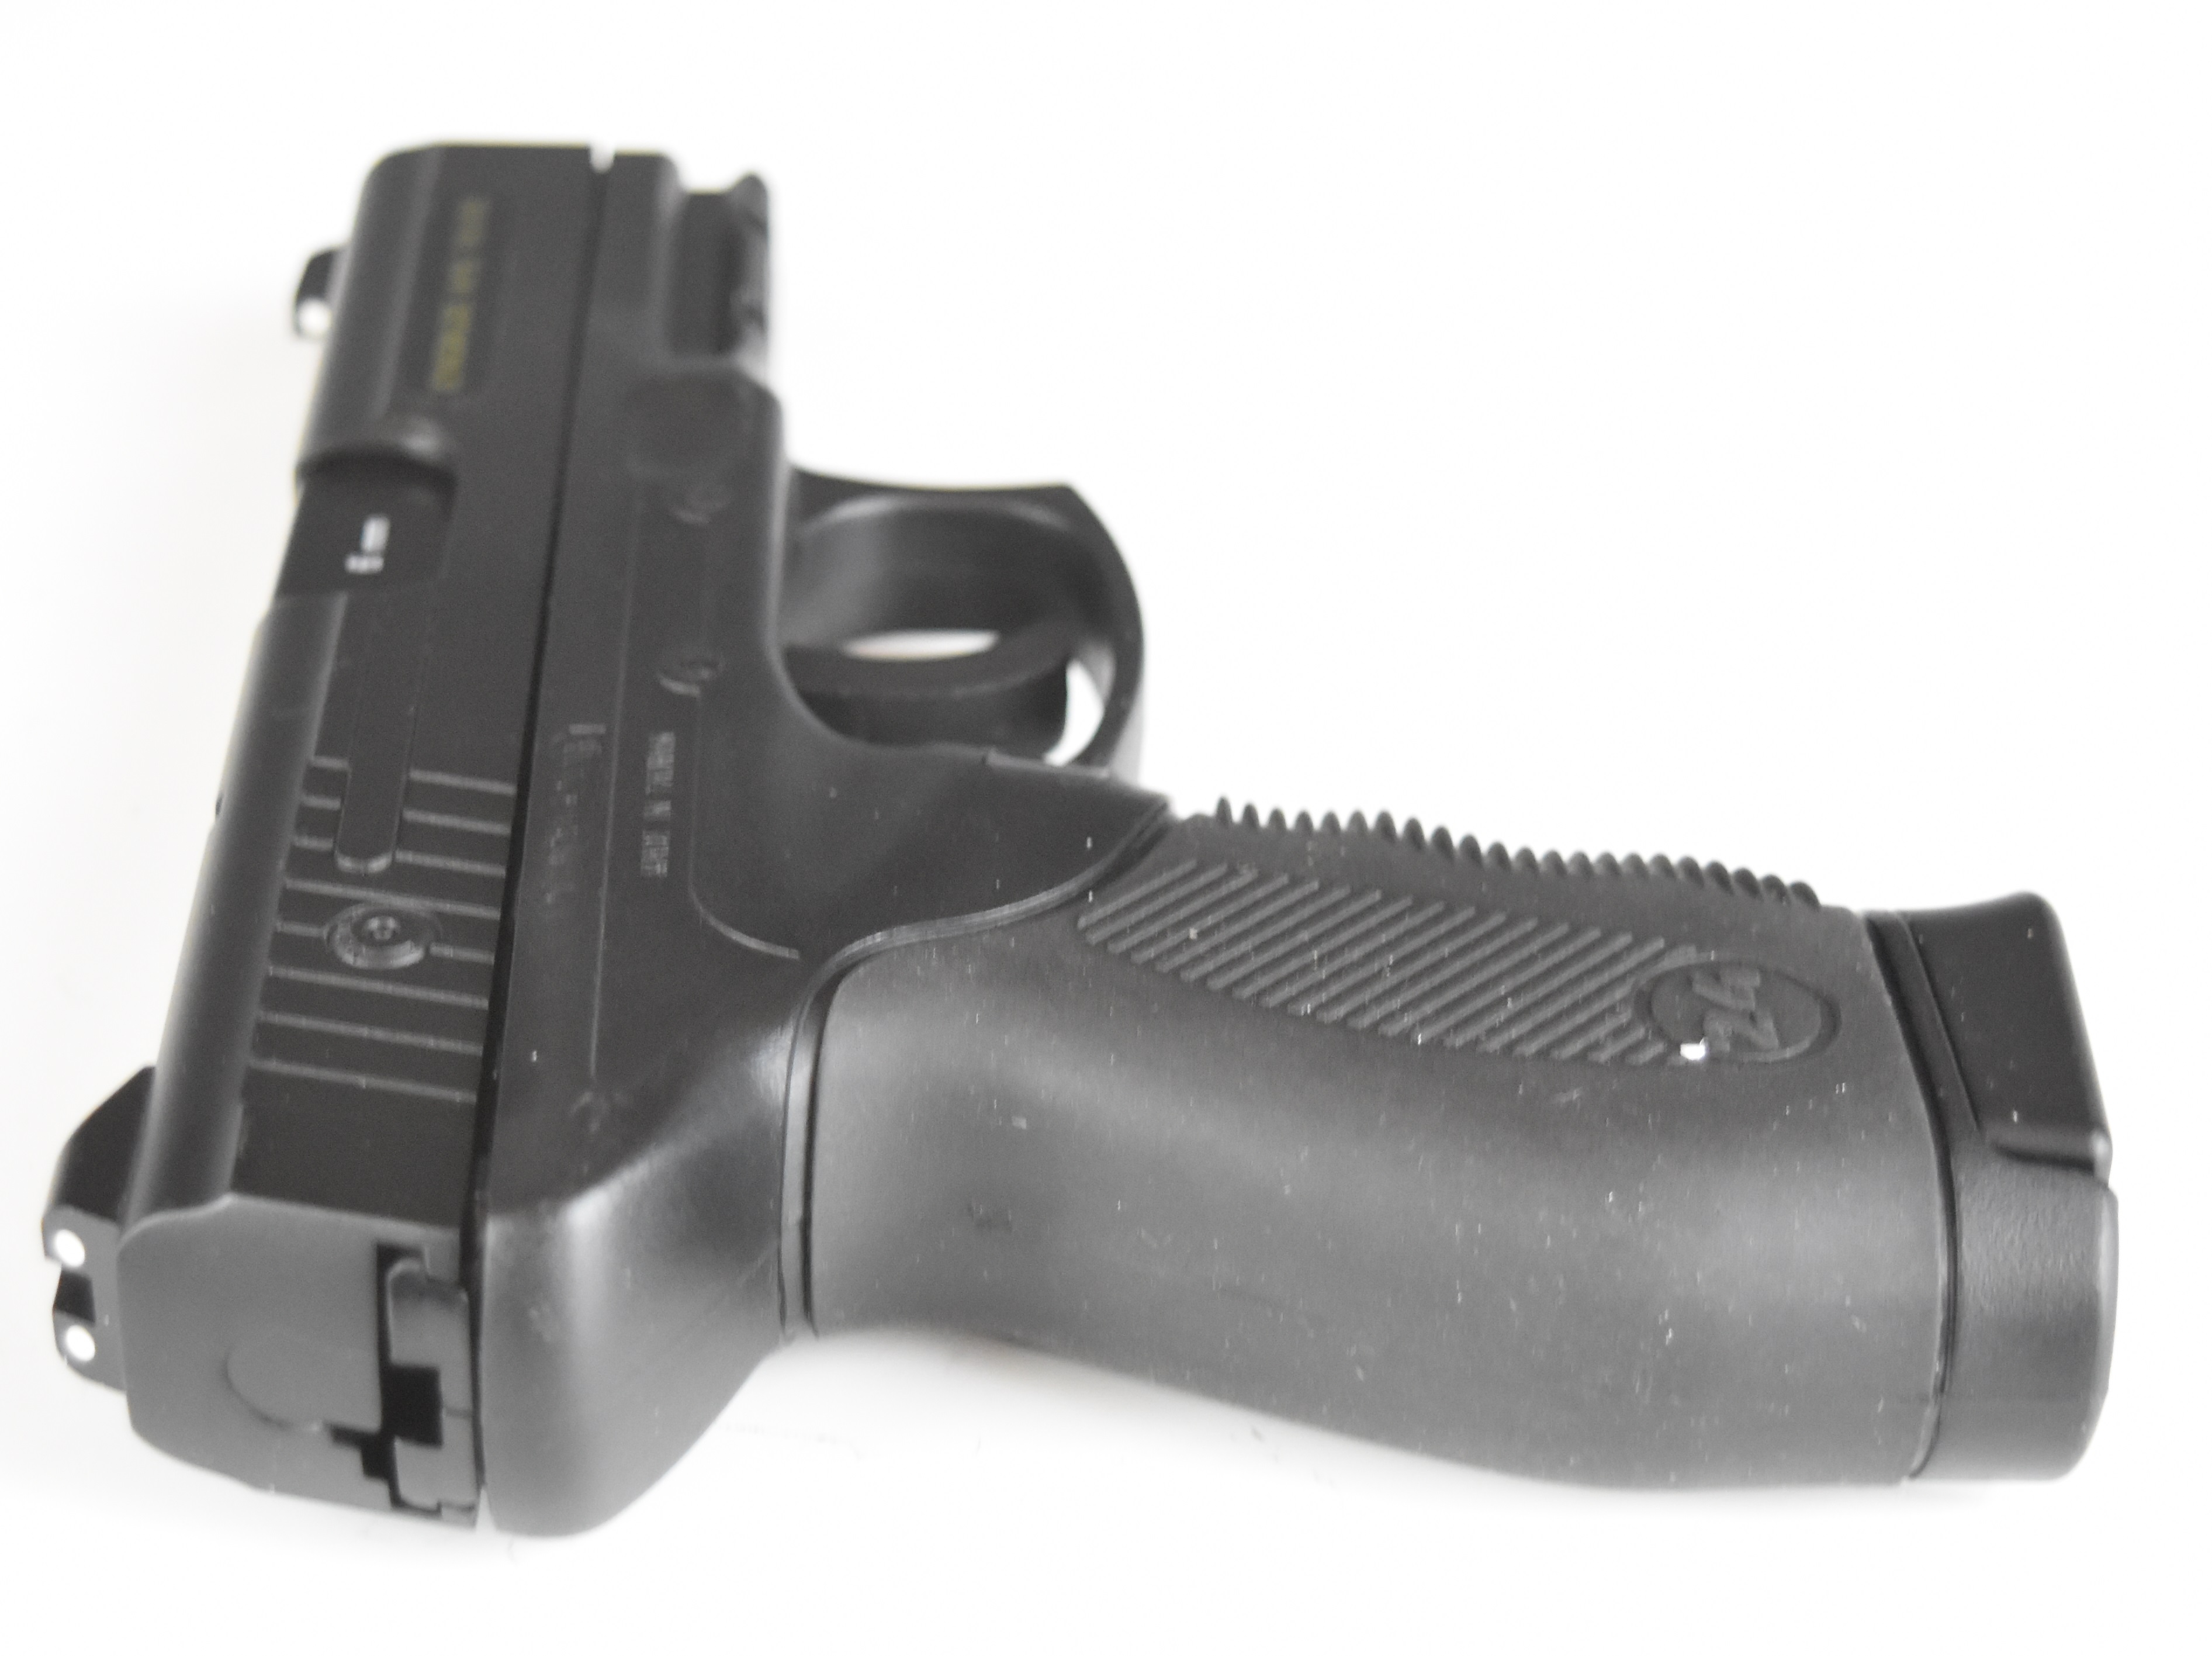 Cybergun 24/7 6mm CO2 airsoft pistol with textured rubber grips, multi-shot magazine and fixed - Image 4 of 14